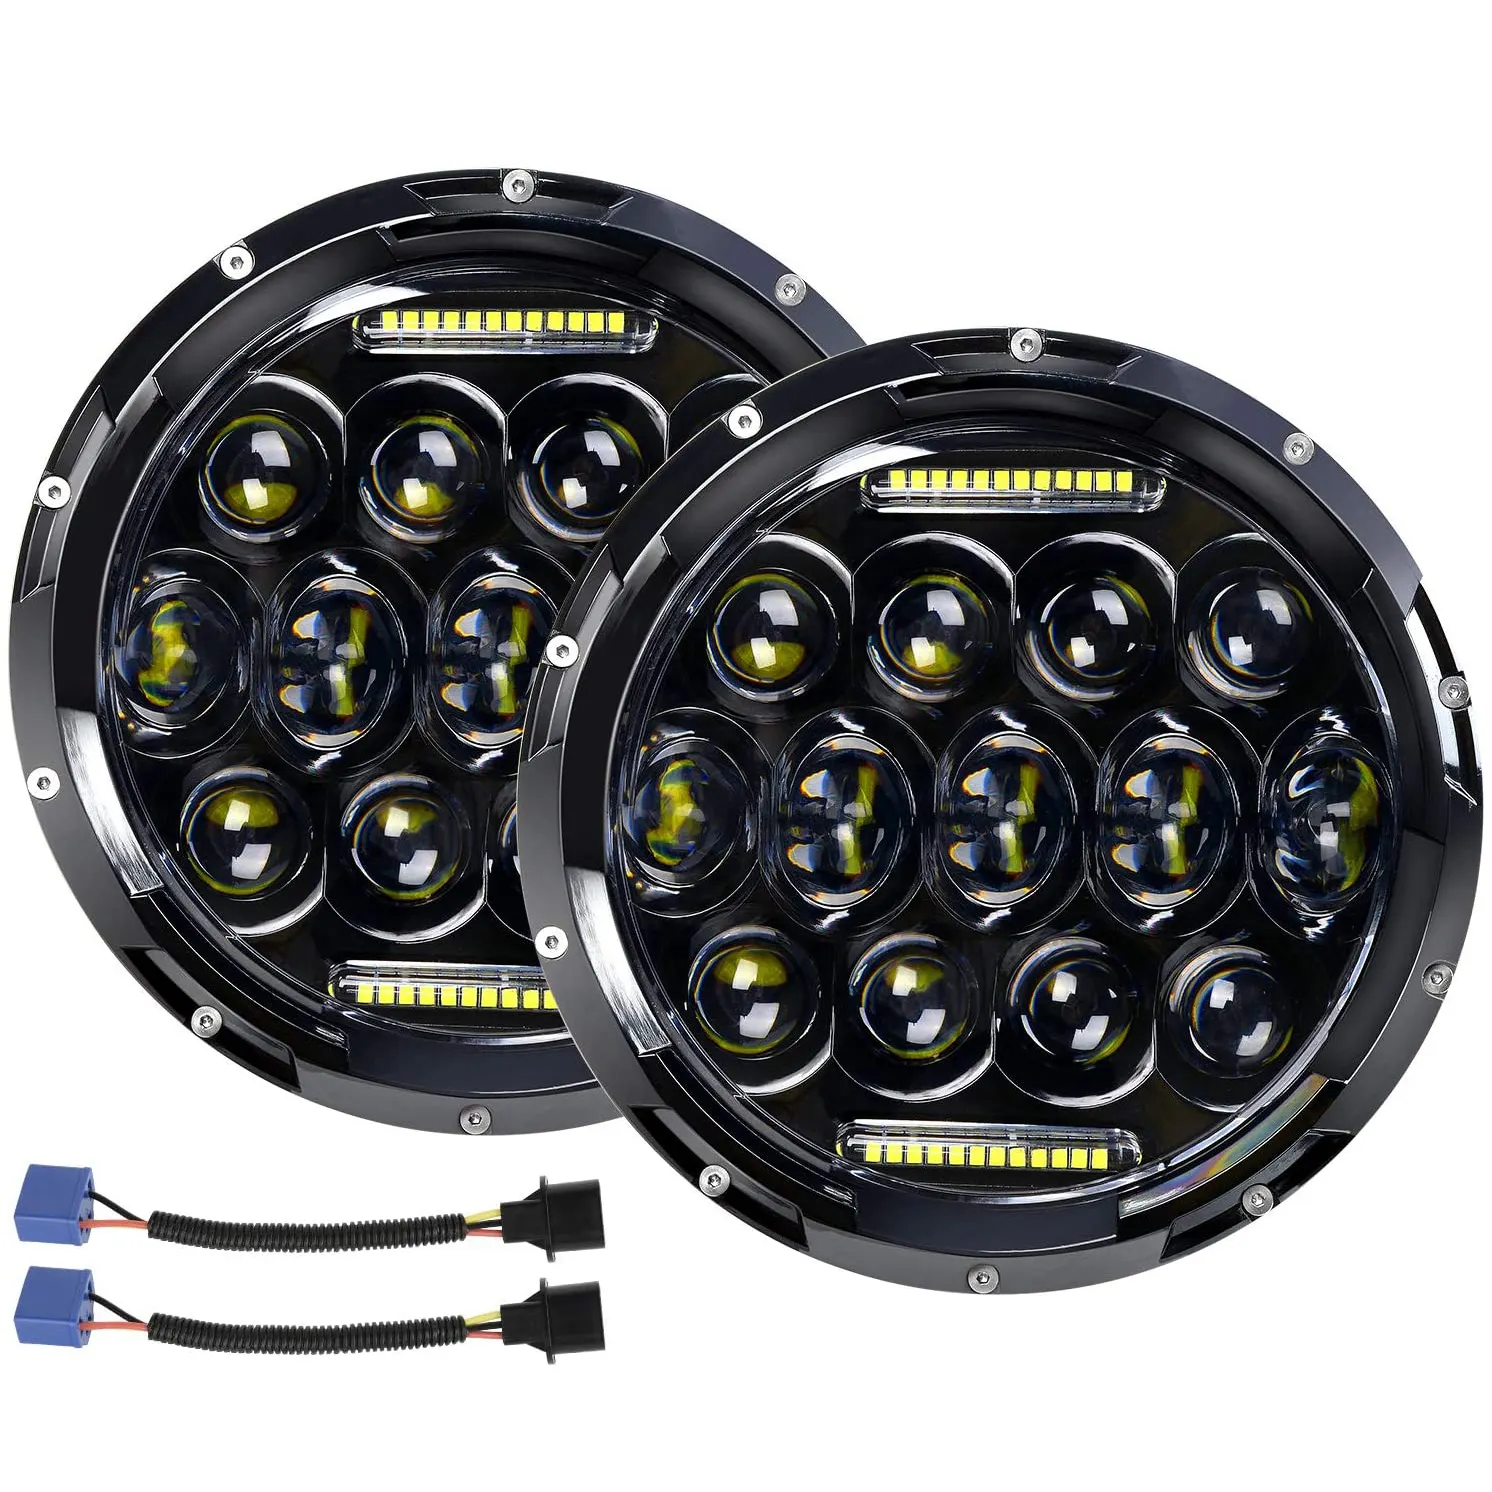 7" Round LED Headlights 78W Car Headlamp with DRL High Low Beam For Jeep Wrangler JK TJ LJ 1997-2018 Motorcycle